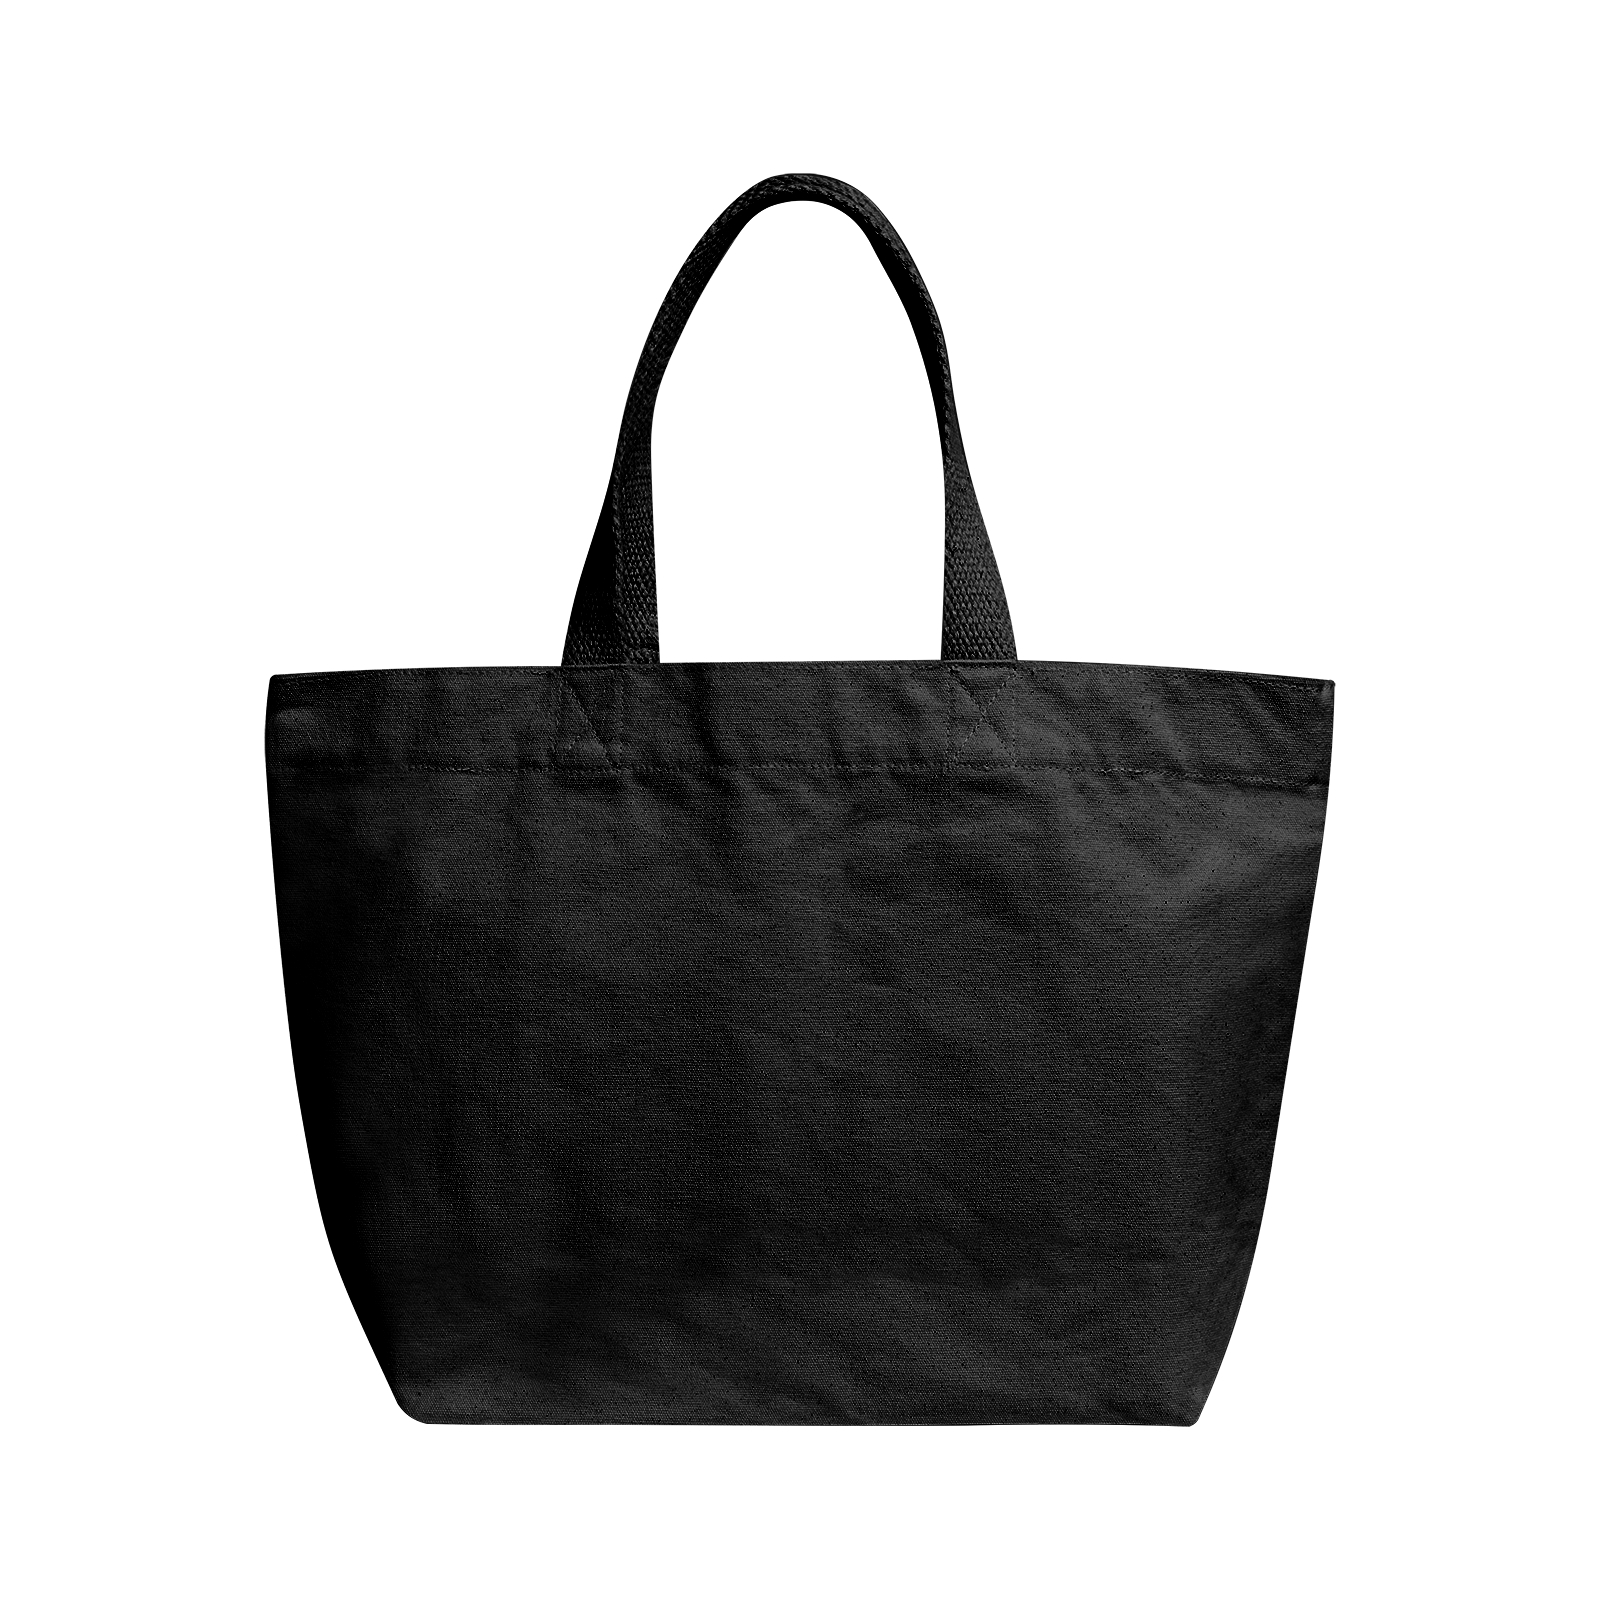 Eease Heavy Duty Canvas Tote Bag Cotton Shopping Handbag Blank Tote Pouch for DIY Crafts Gift Bag(Black), Adult Unisex, Size: Large